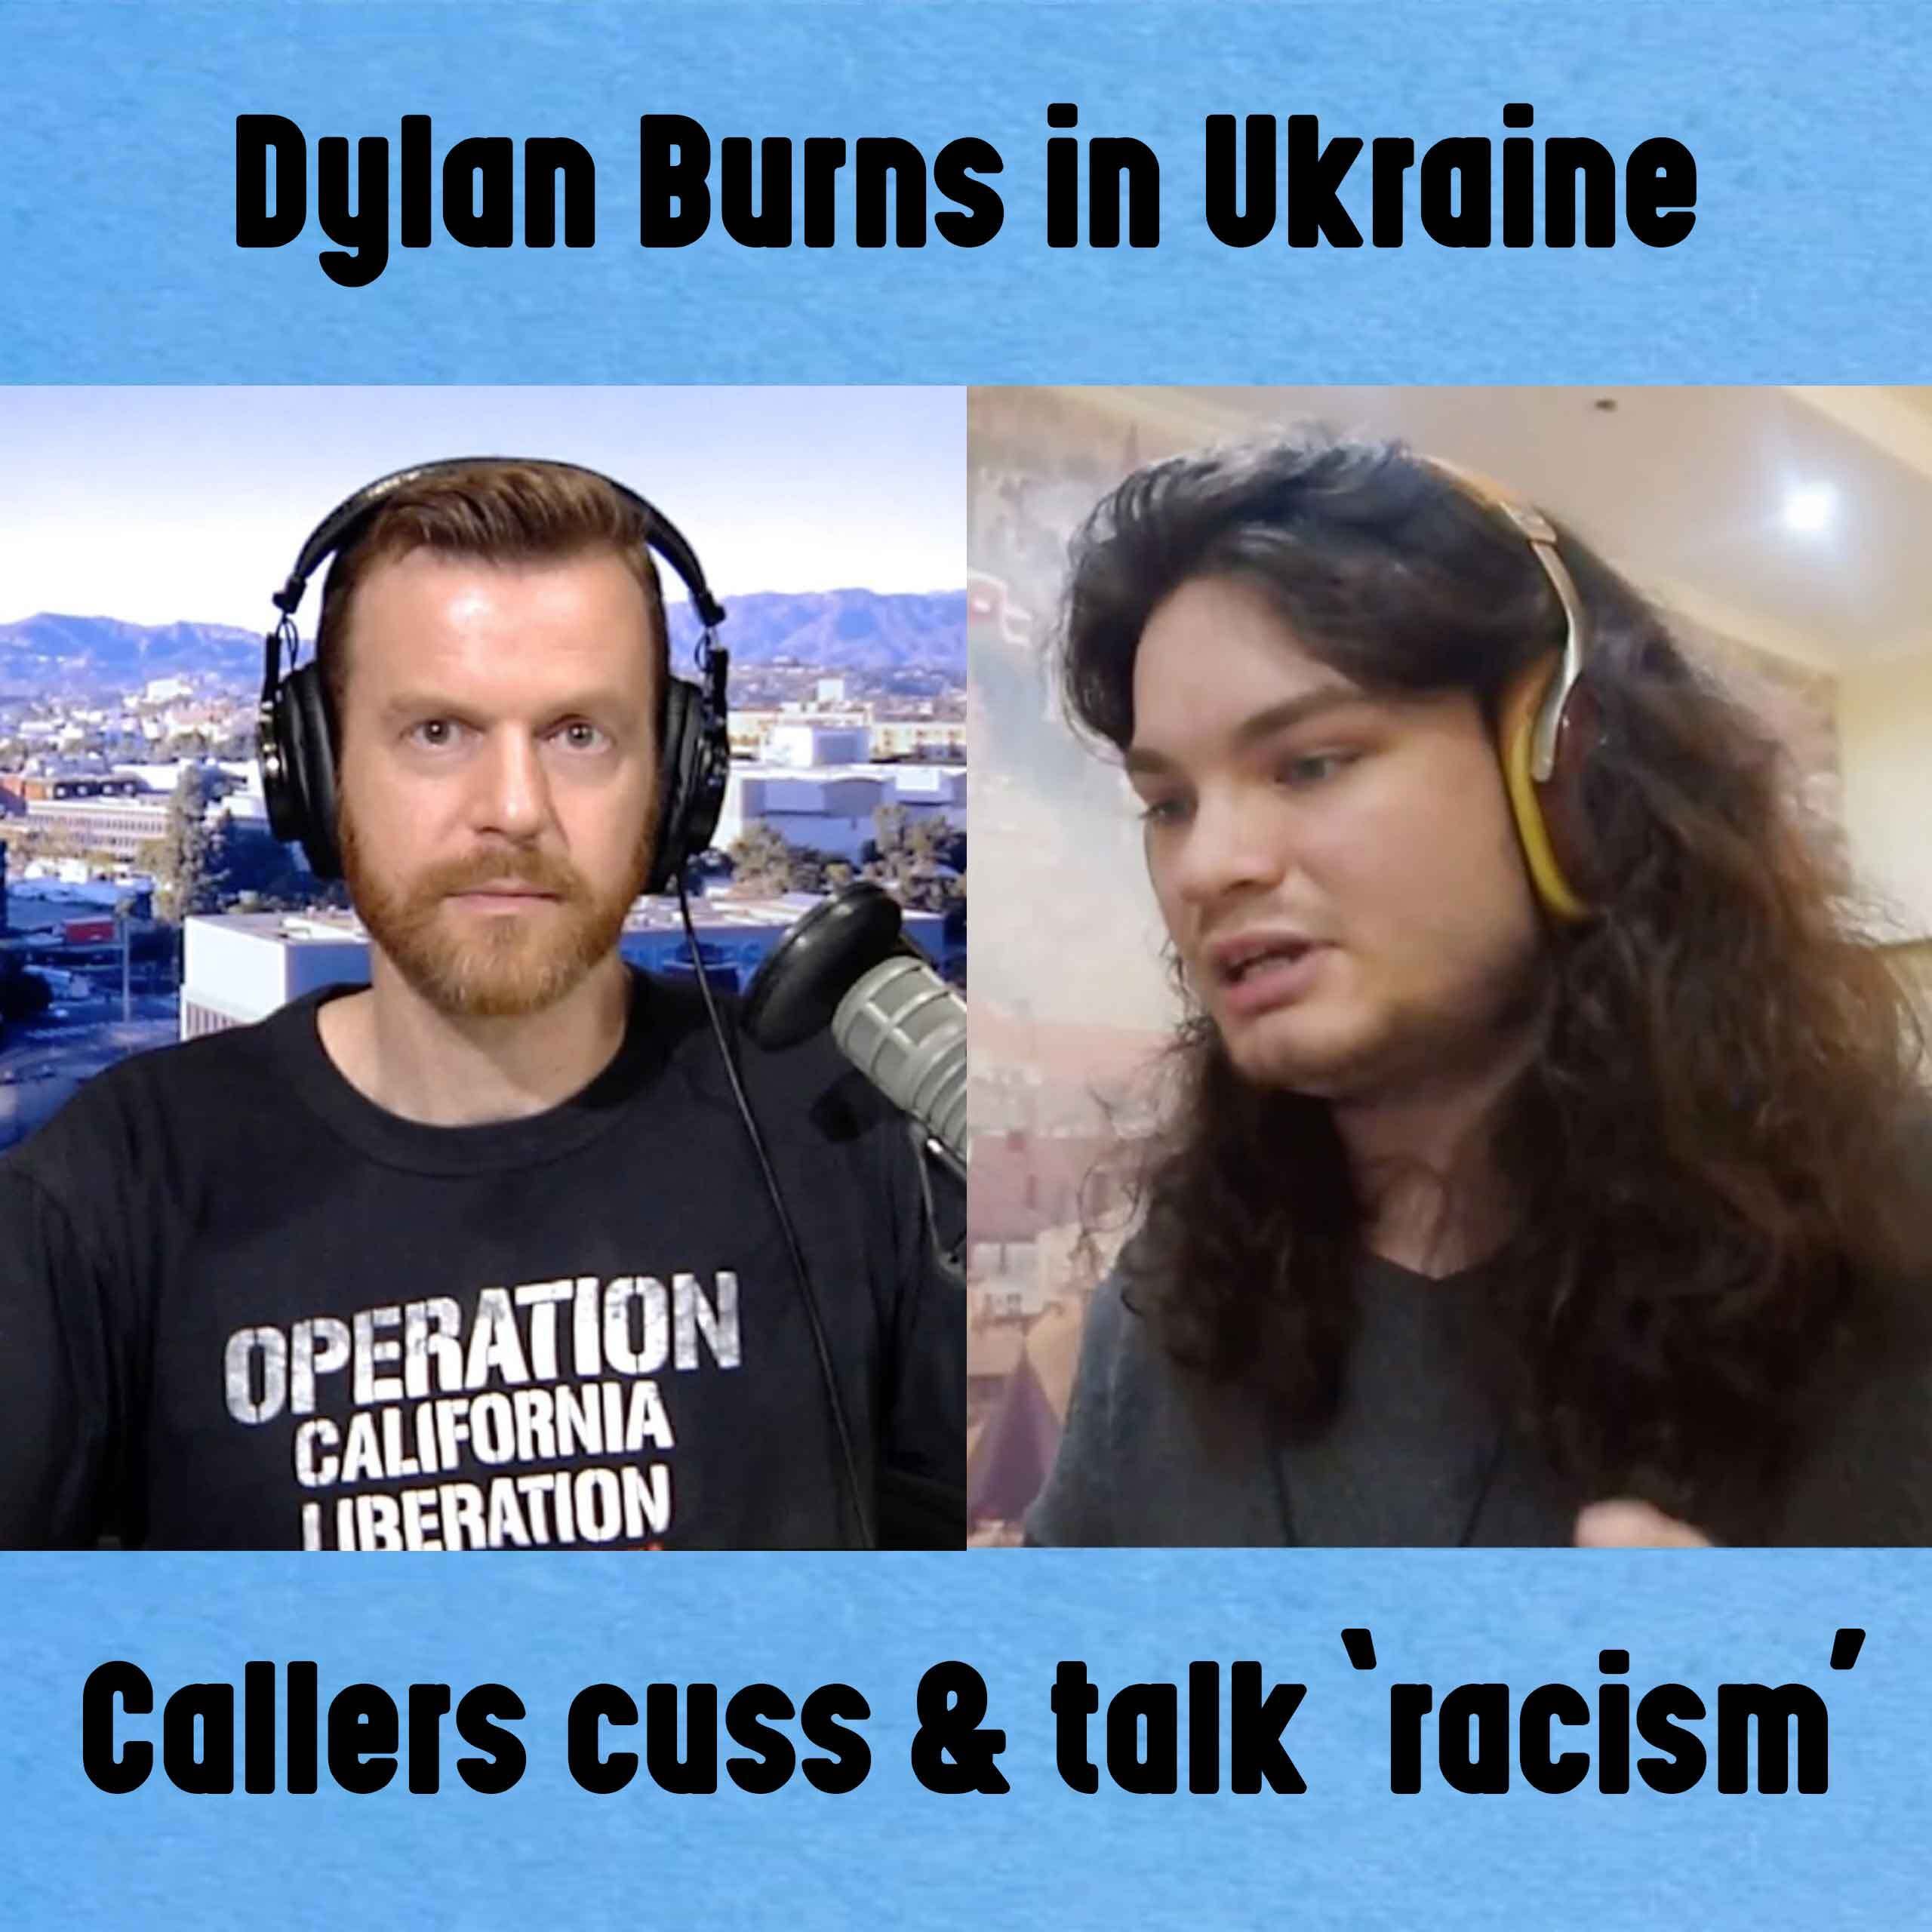 05/17/22 Tue. GUEST: Dylan Burns for Ukraine! Callers Cuss and Talk ’Racism’